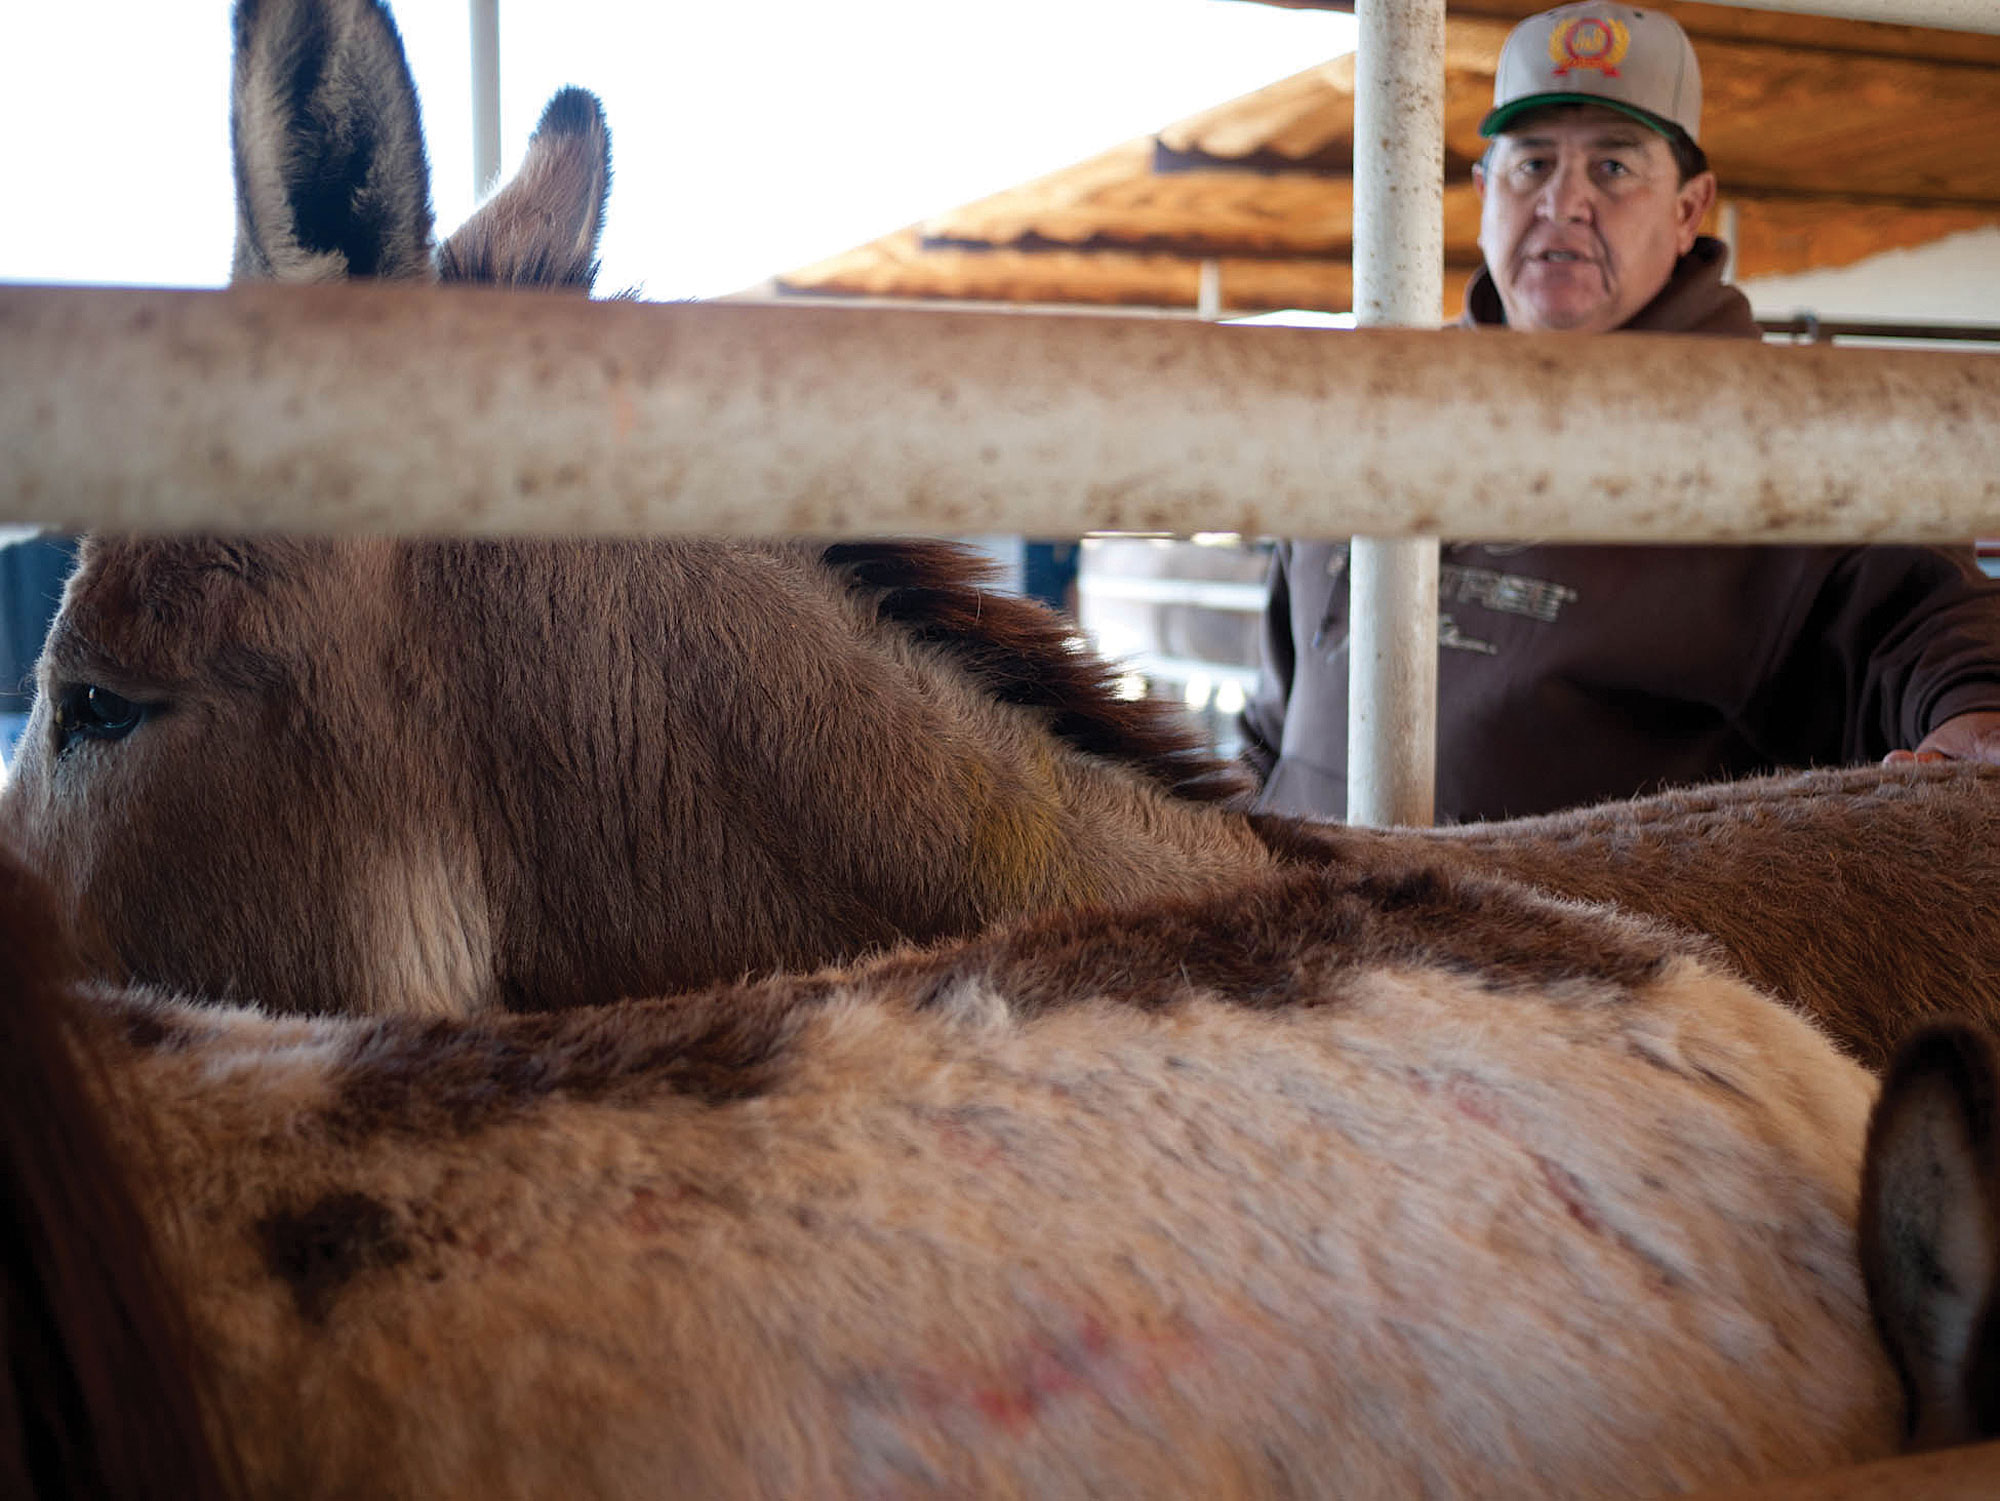 Ruben Brito, the co-owner of J&R Stockyards in Presidio, moves animals into a narrow holding cell where they await inspection from Mexico's federal agriculture department.